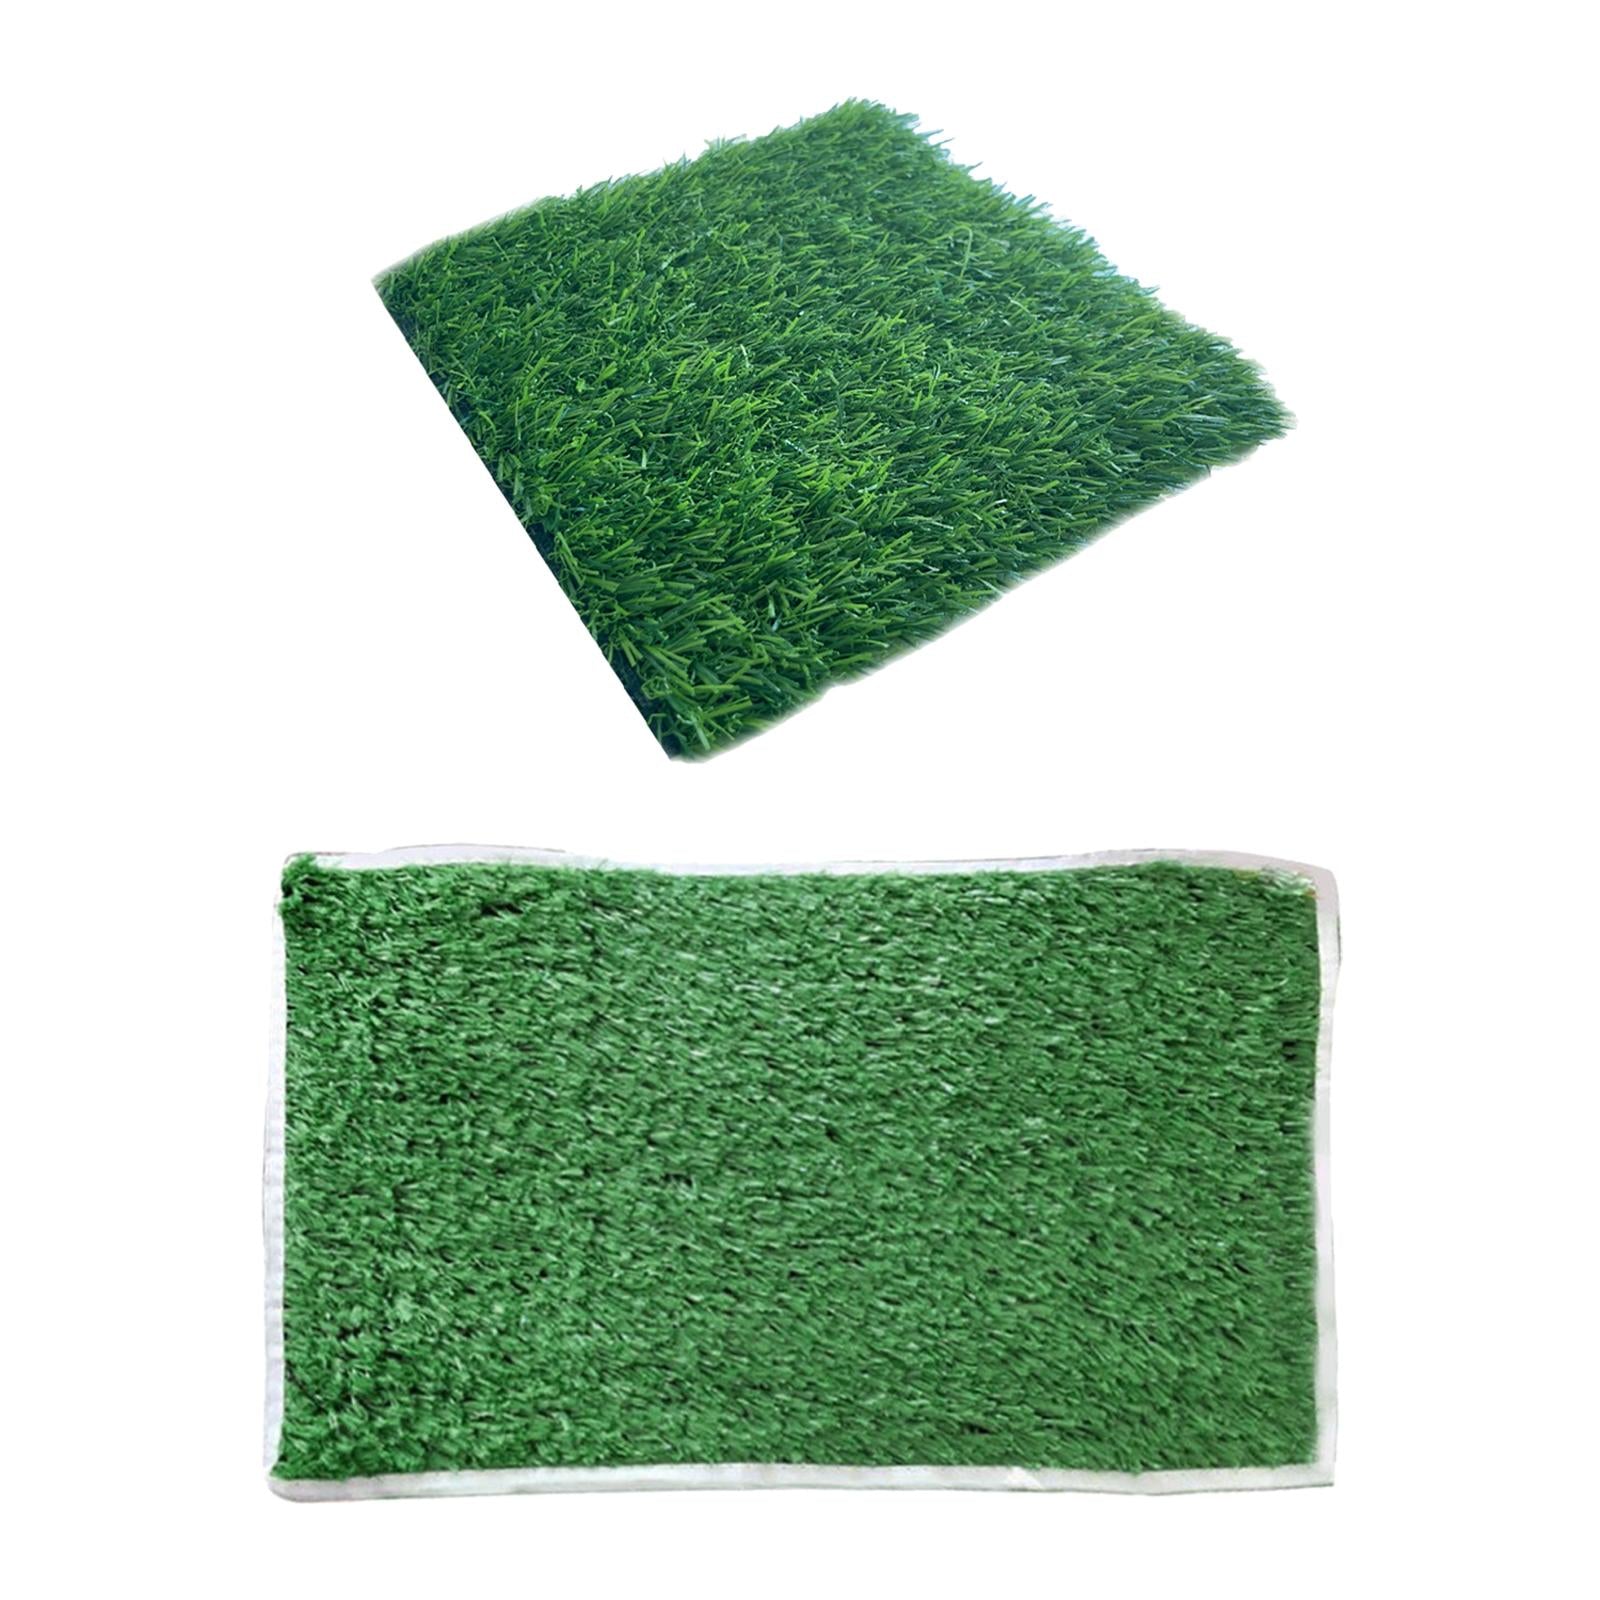 Dog Pee Pad Pet Toilet Training Puppy Green Trainer for Outdoor Home Decor S